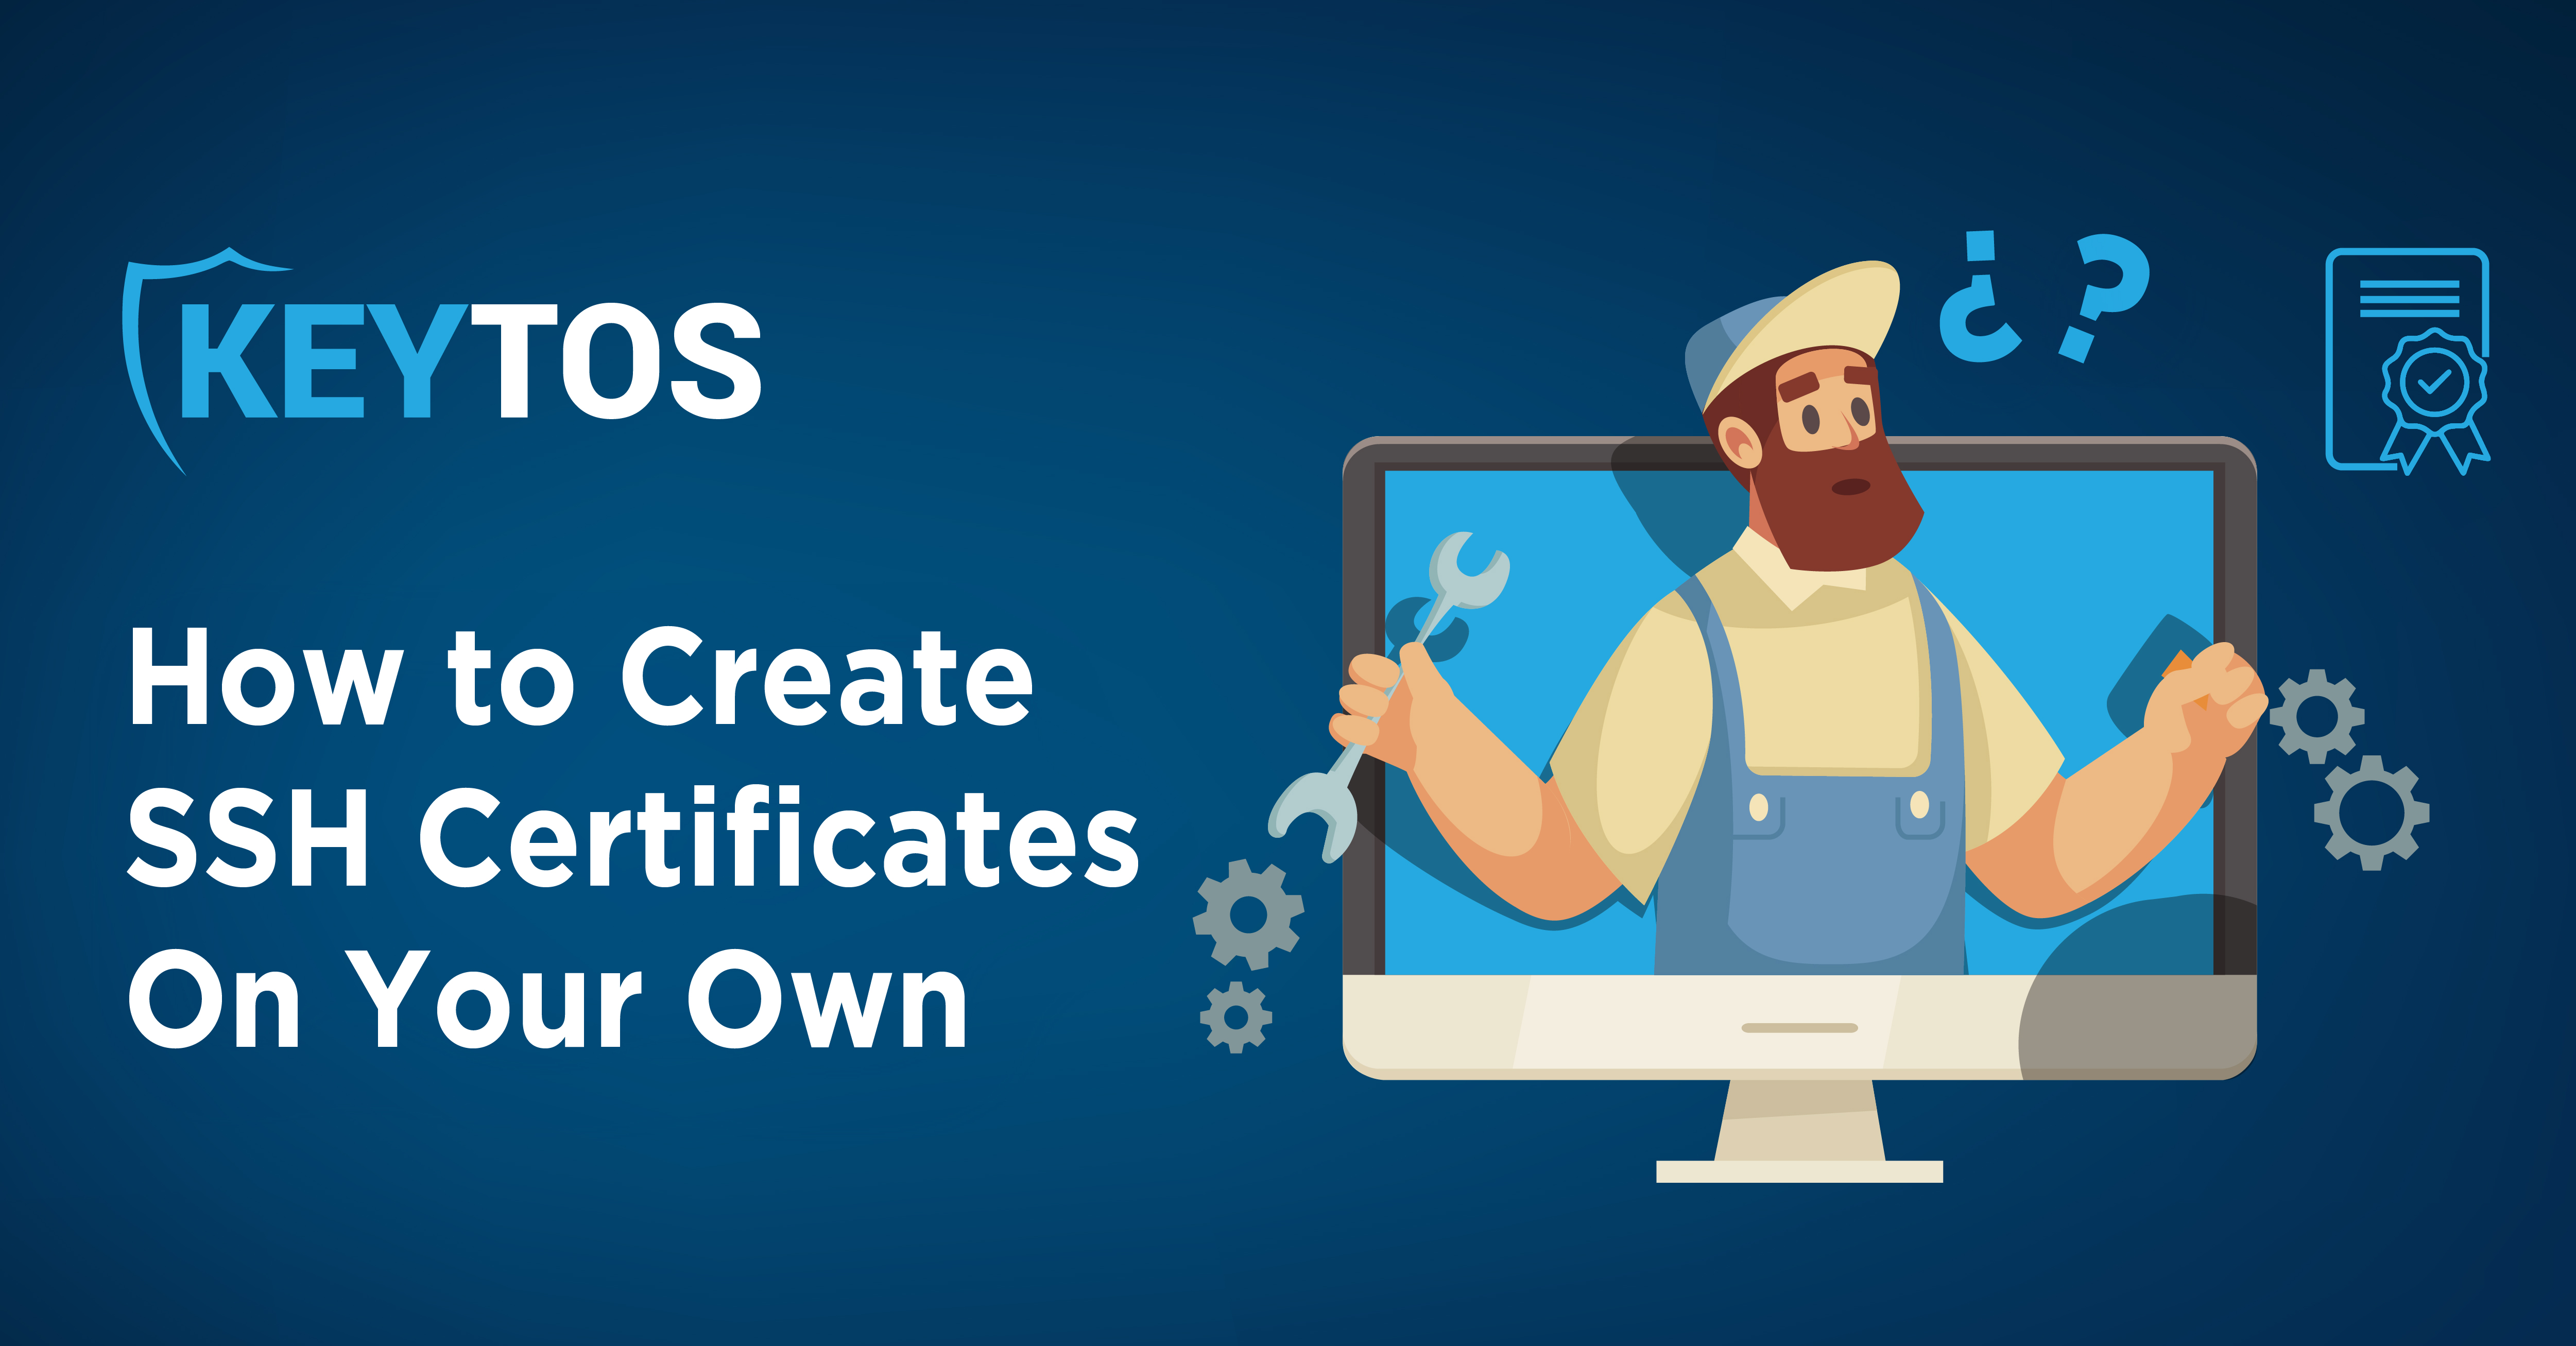 How to Create SSH Certificates